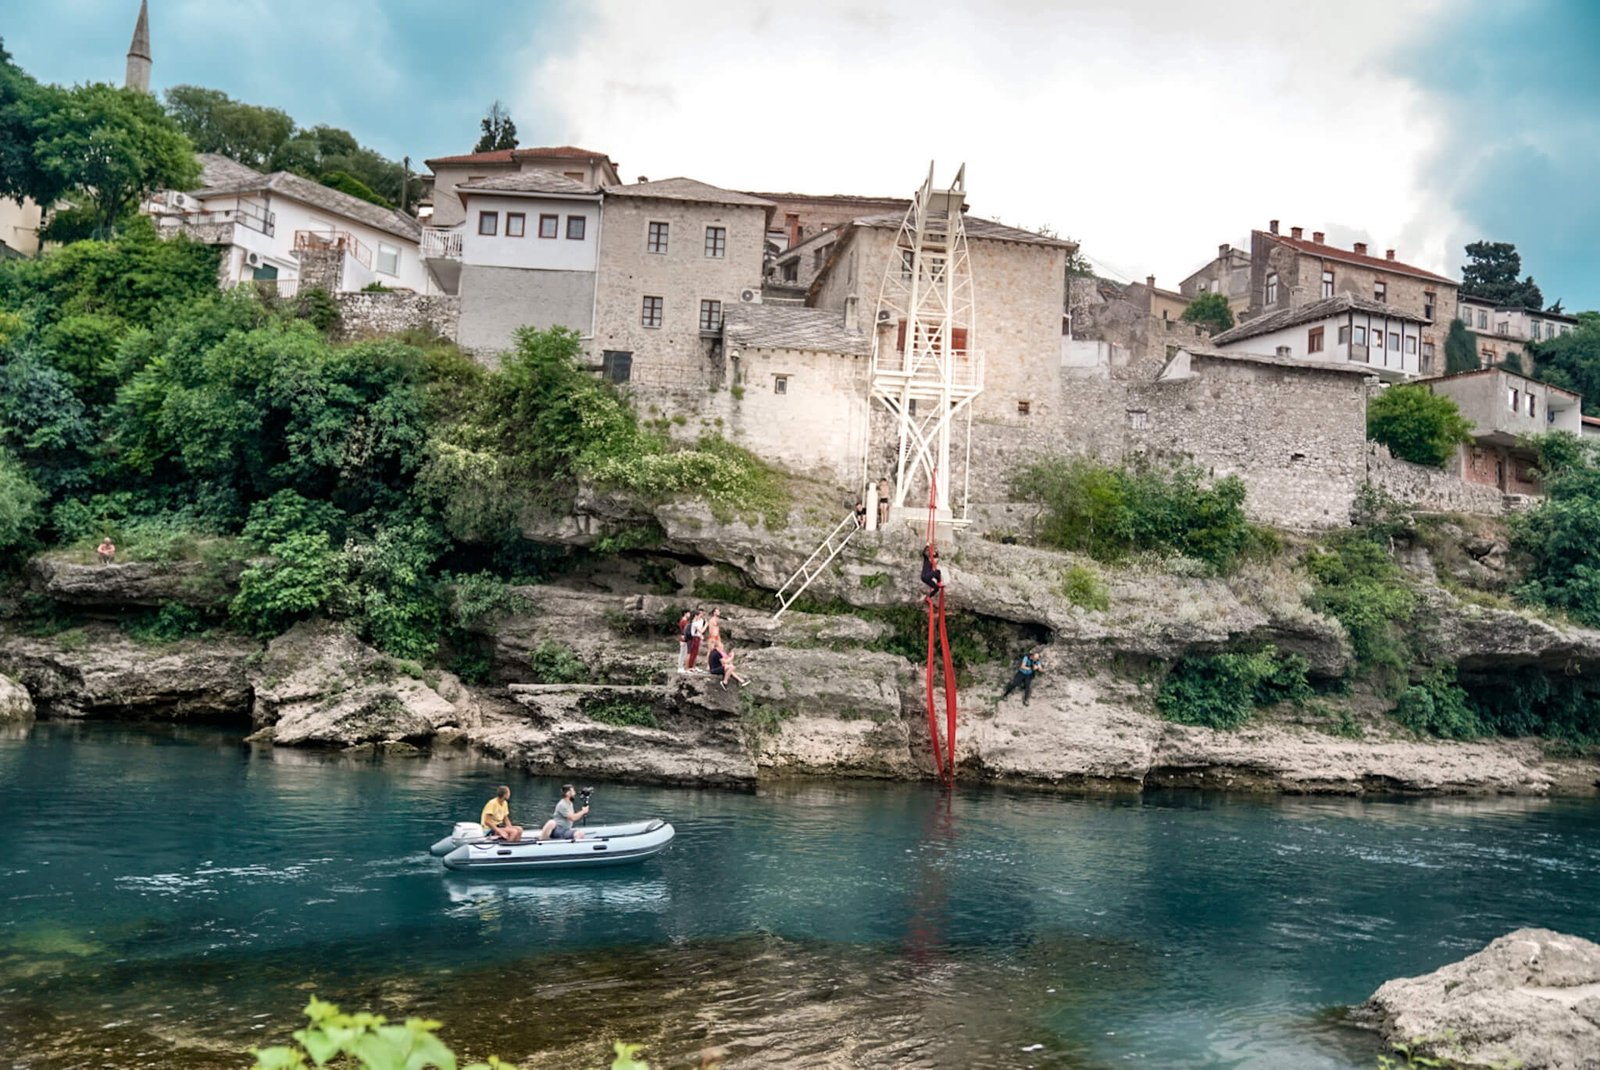 Divers in Mostar